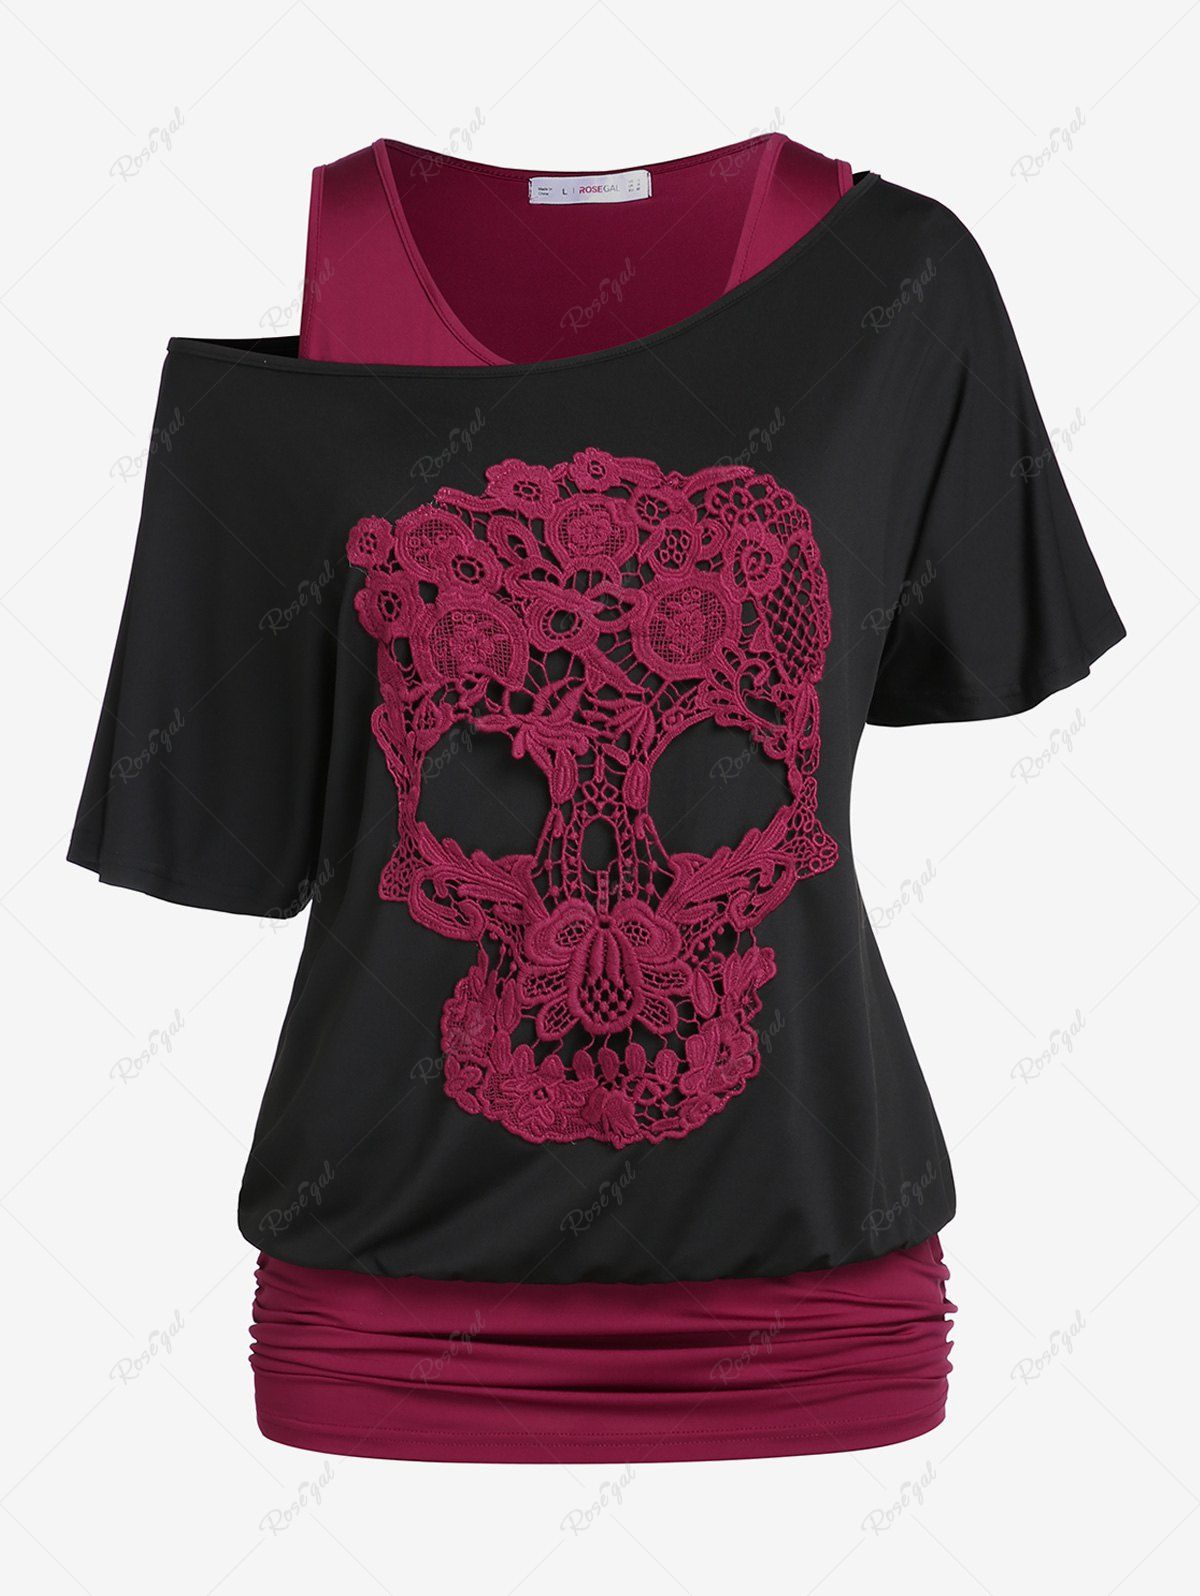 Trendy Plus Size & Curve Skew Neck Skull Lace Gothic Tee and Ruched Blouson Tank Top Set  